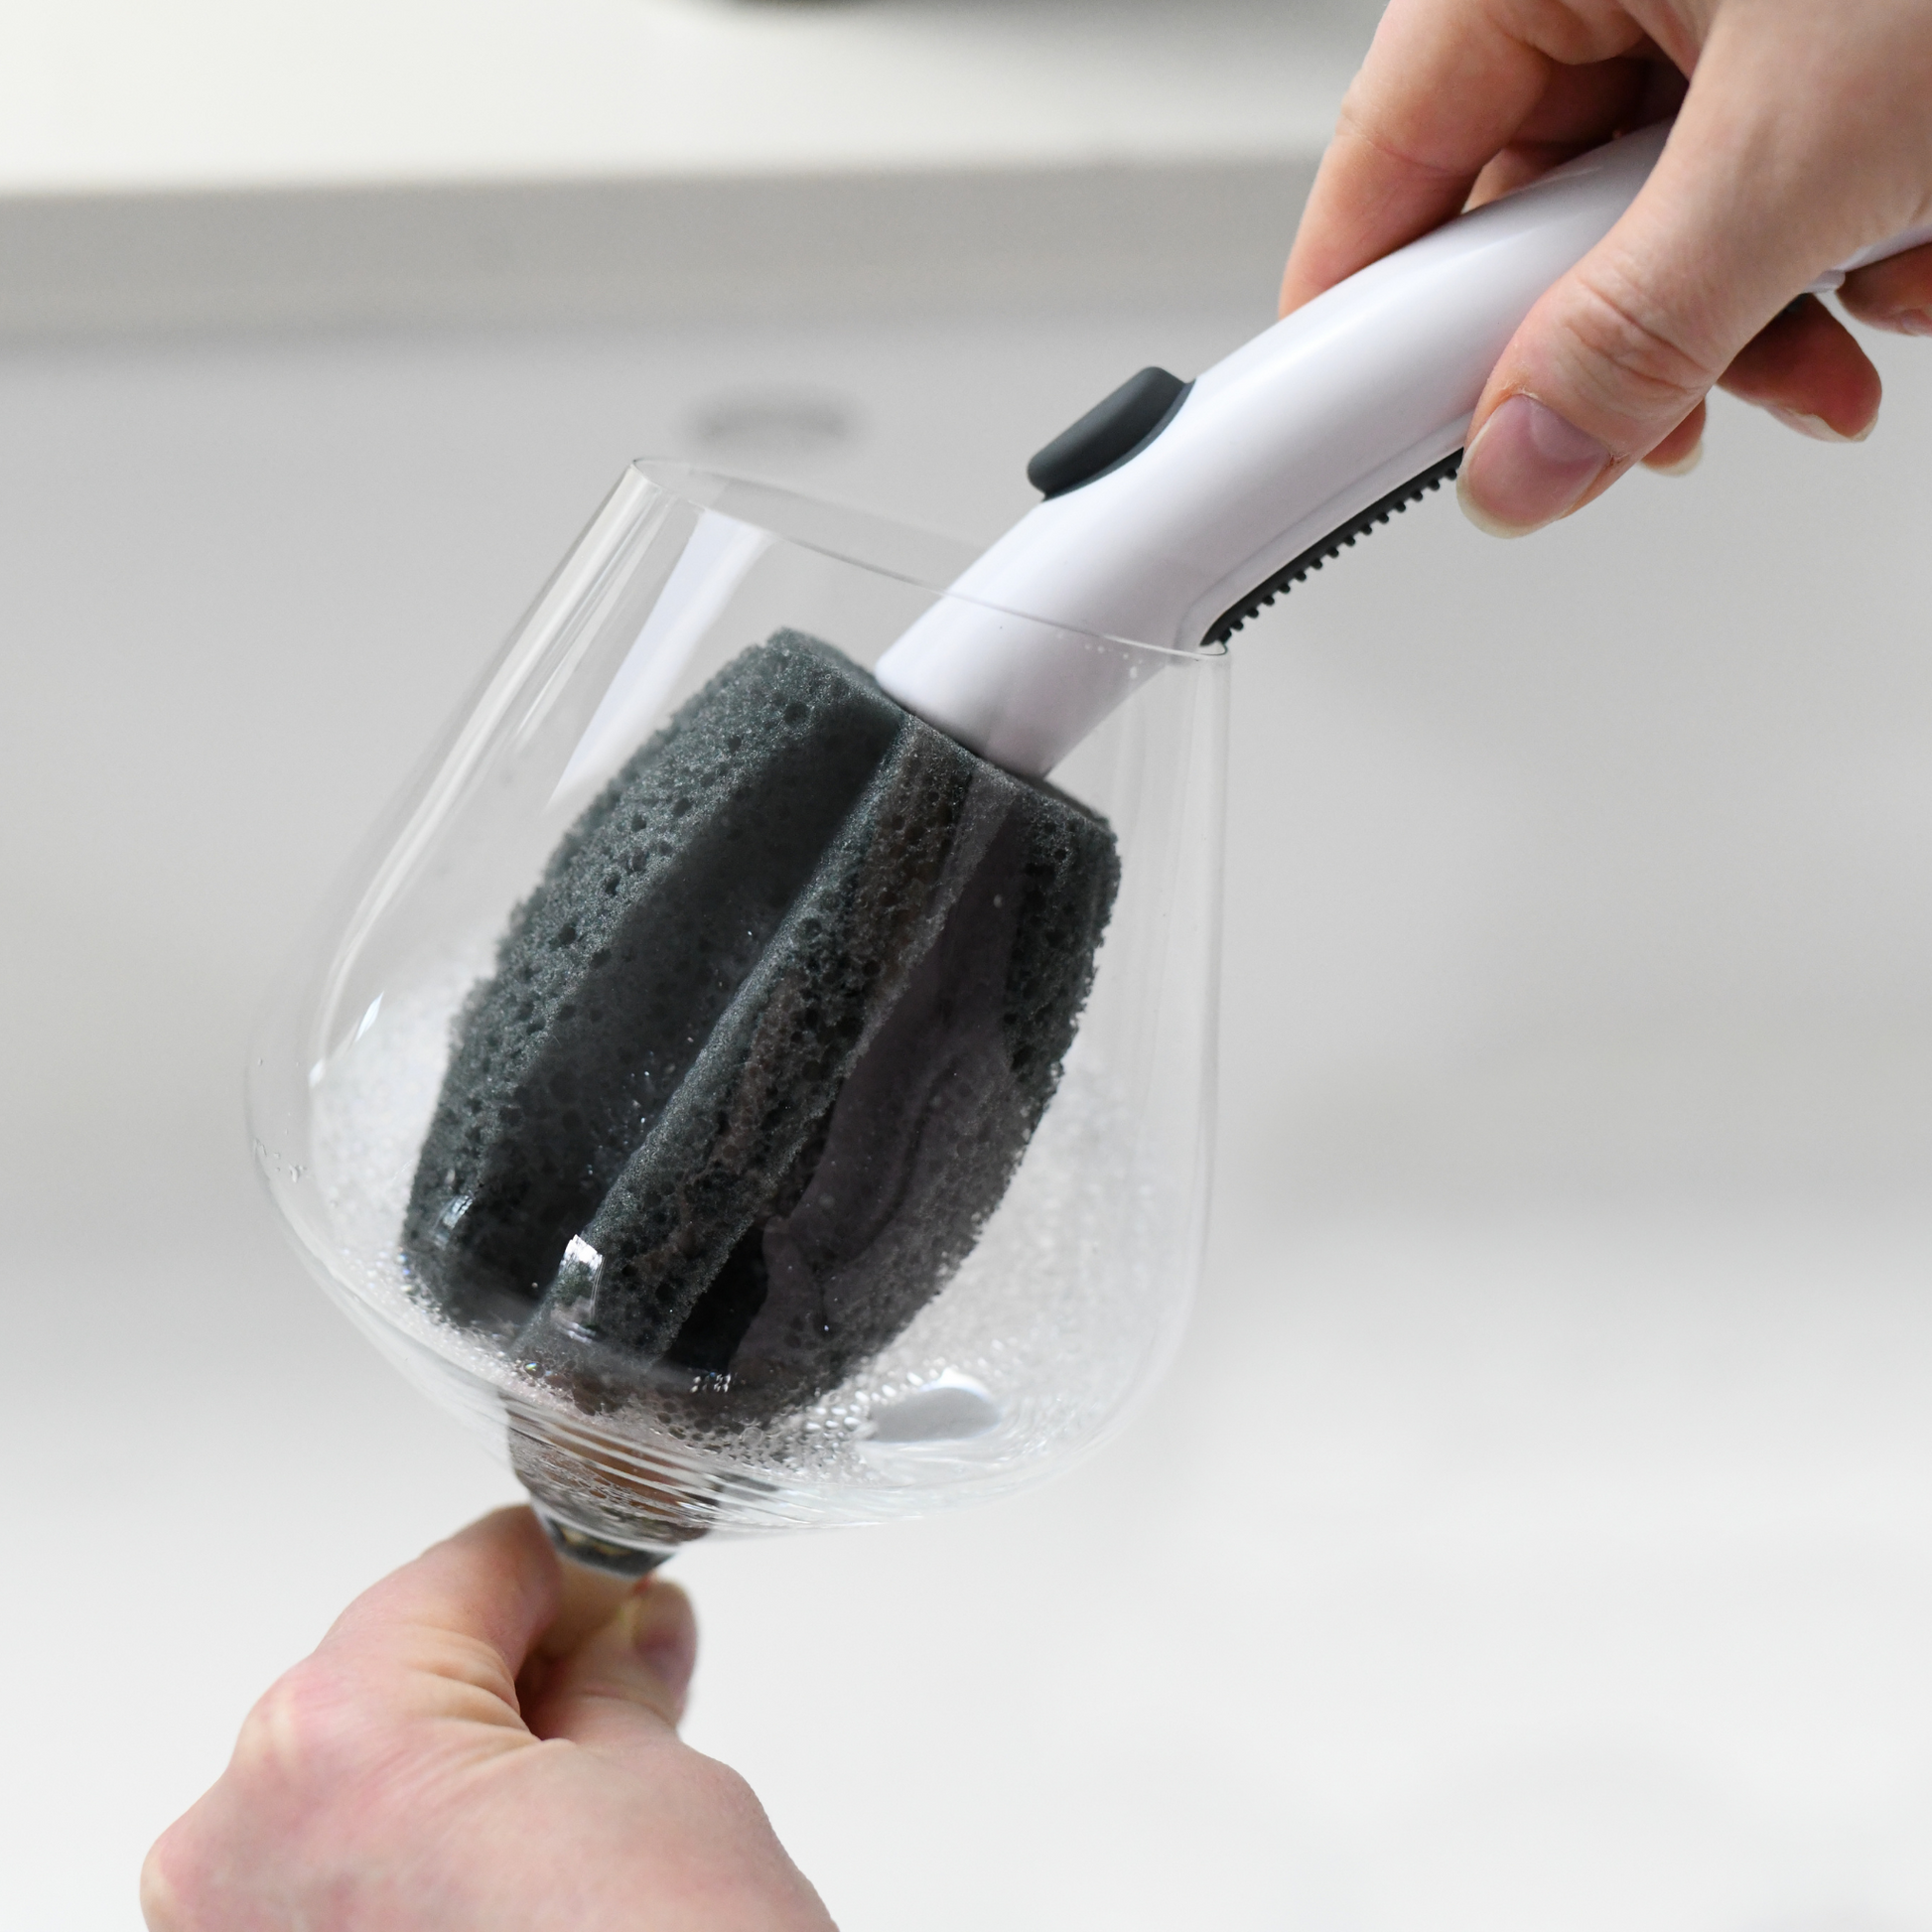 The WINE Brush can clean both large and small glasses